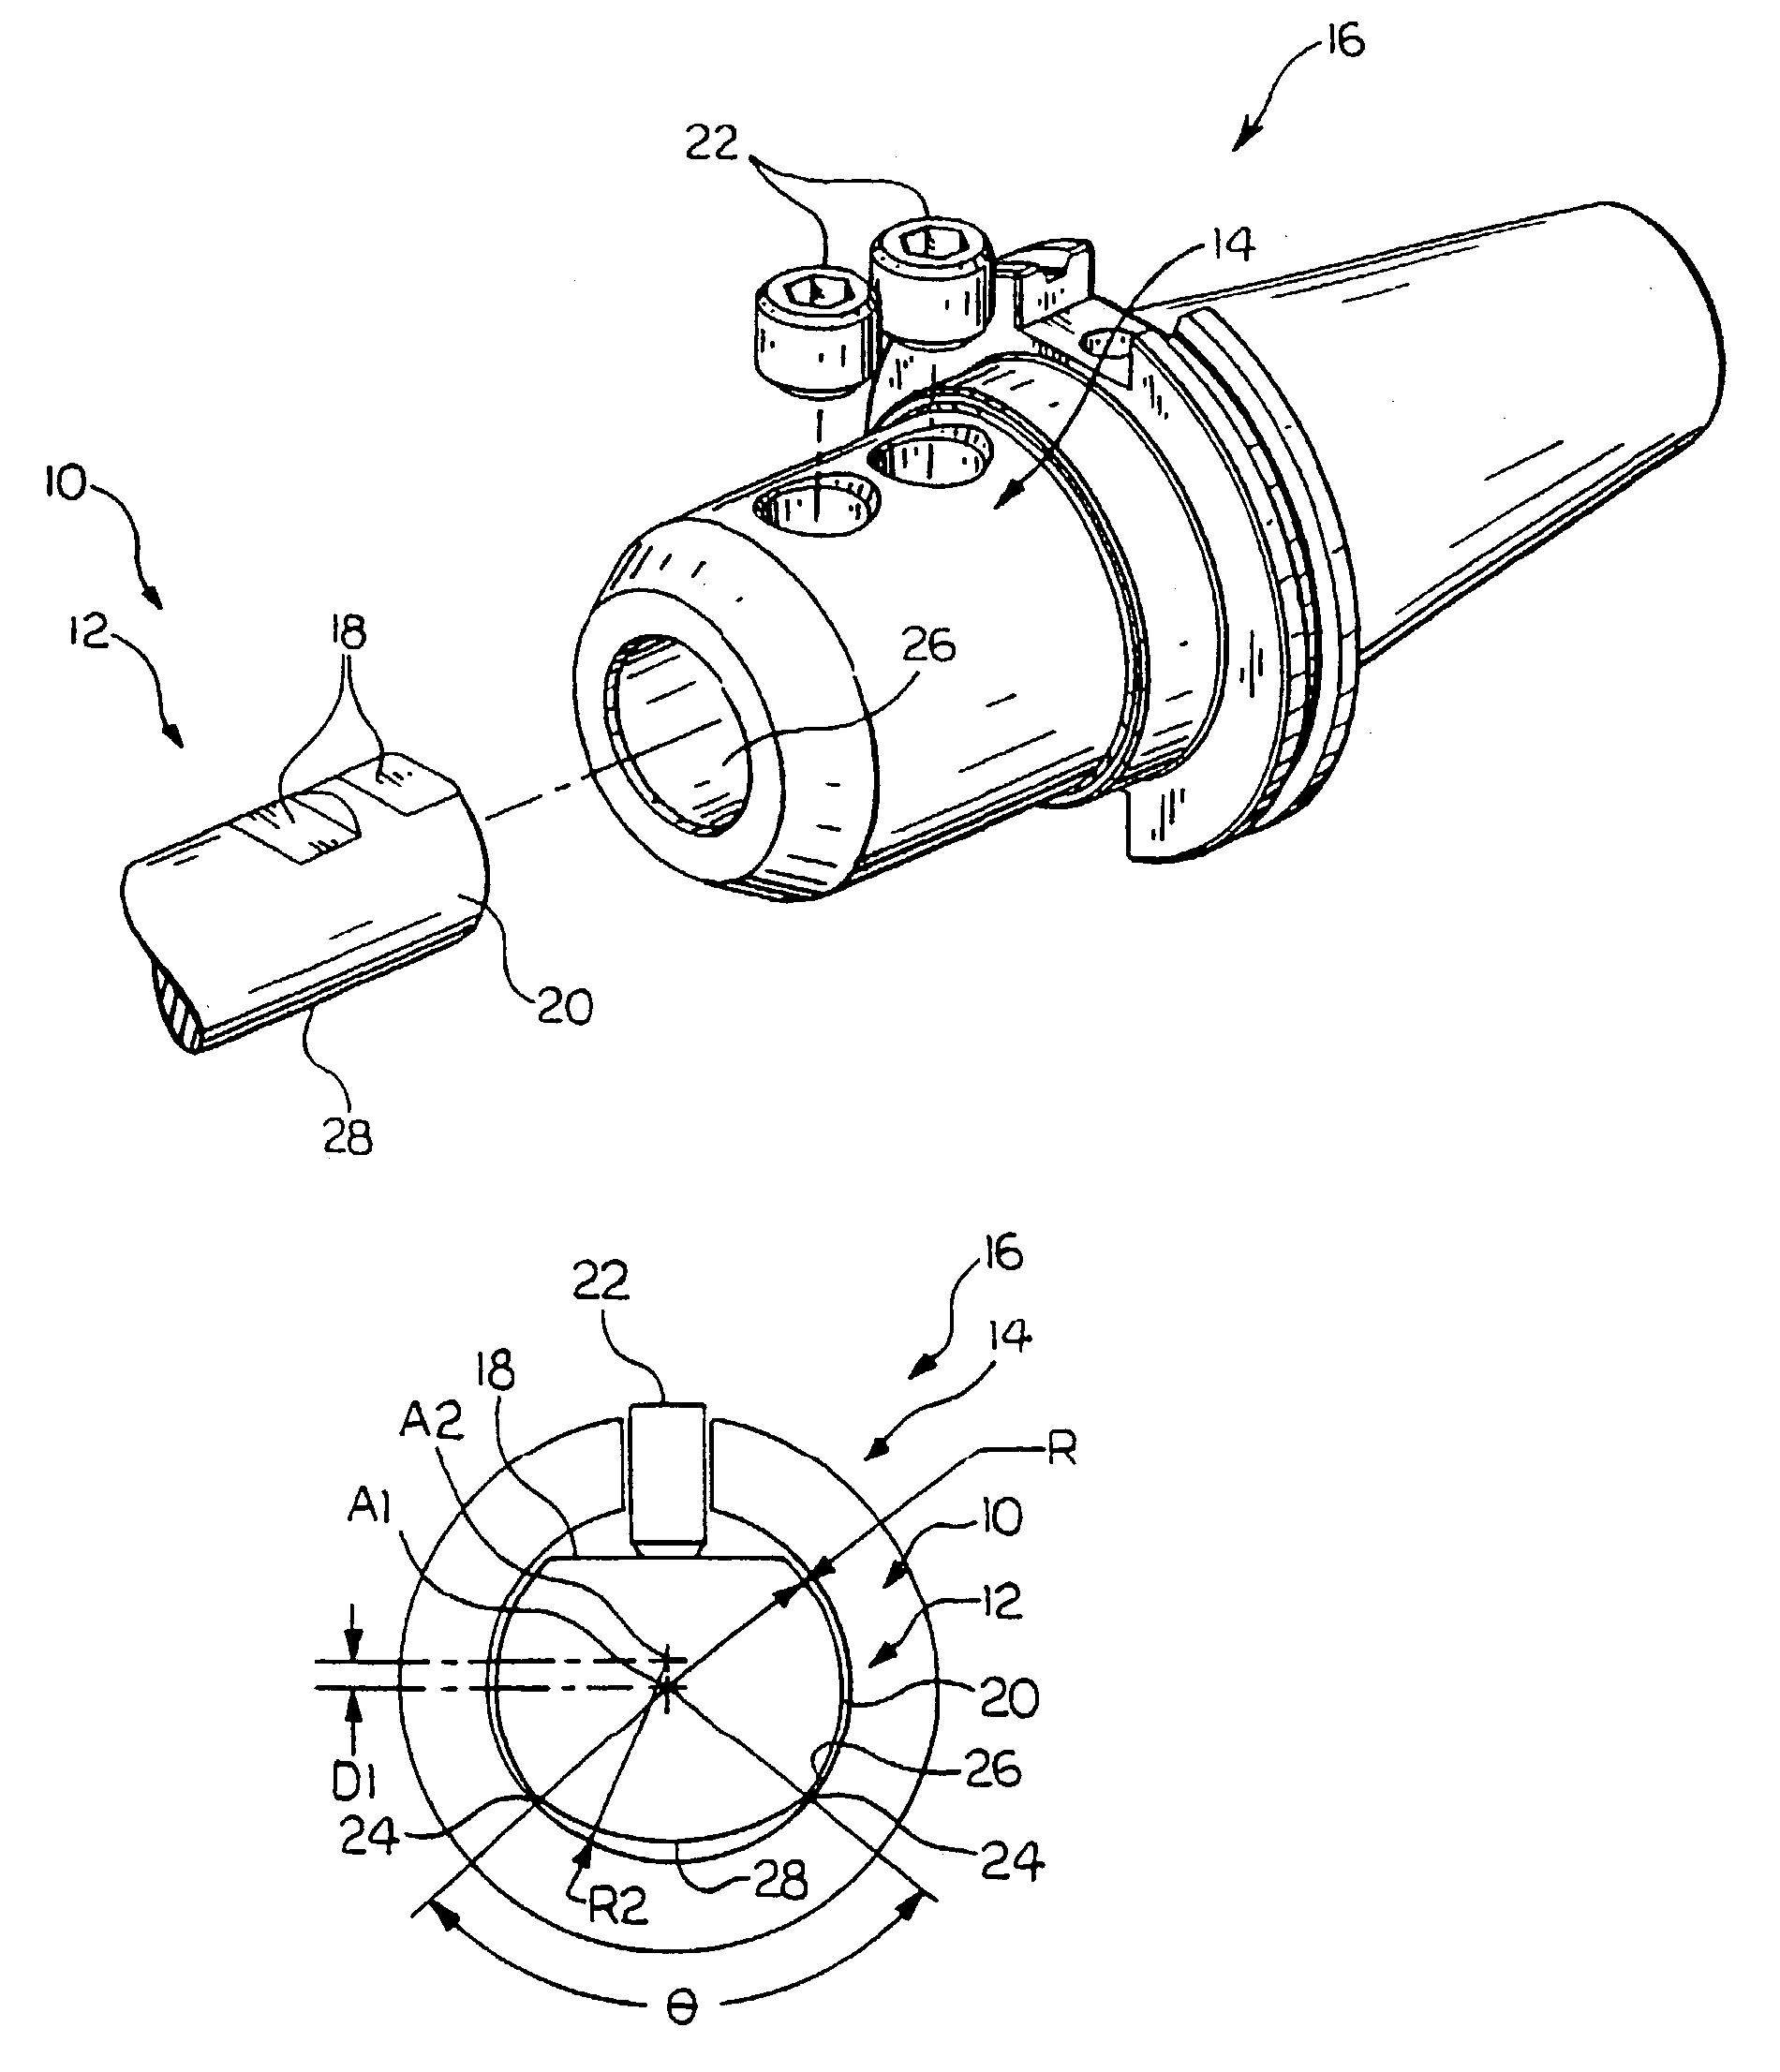 Cutting tool configured for improved engagement with a tool holder